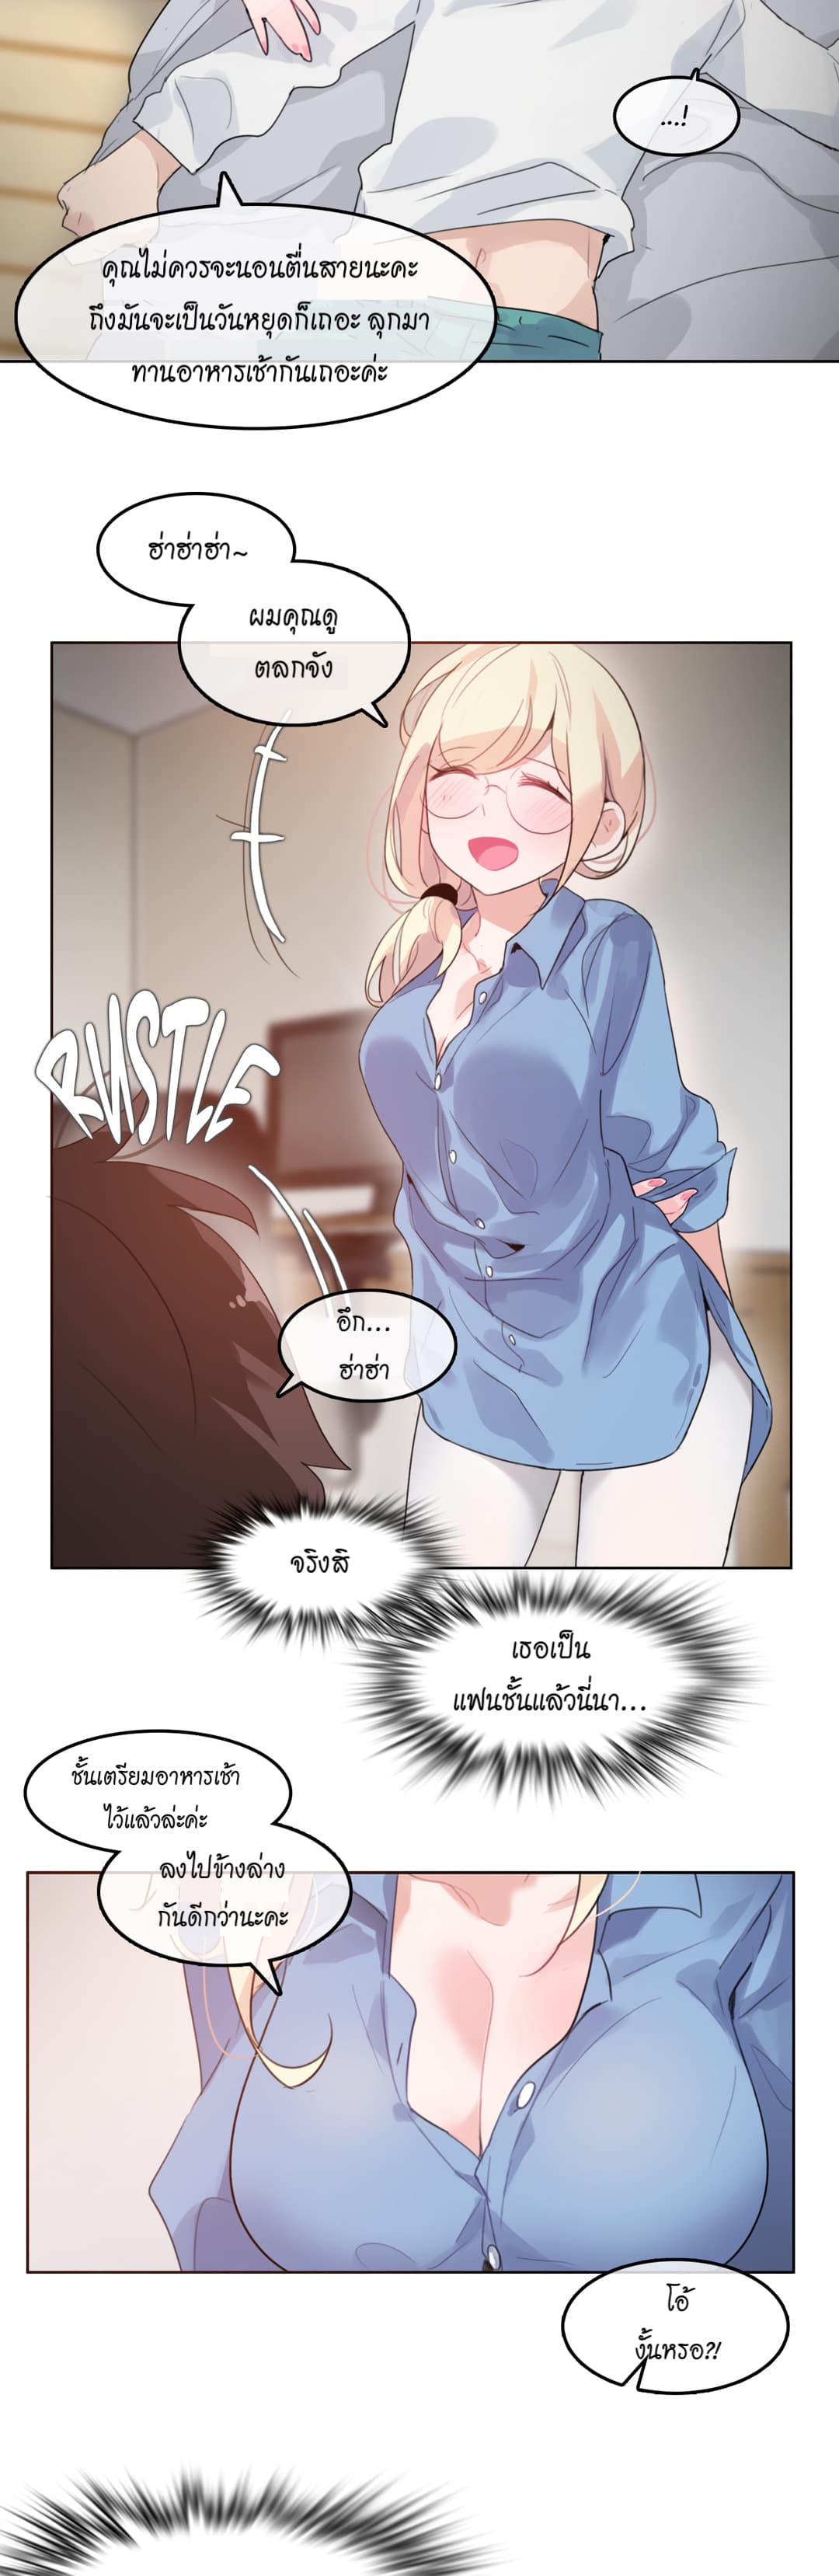 A Pervert’s Daily Life 28 (14)